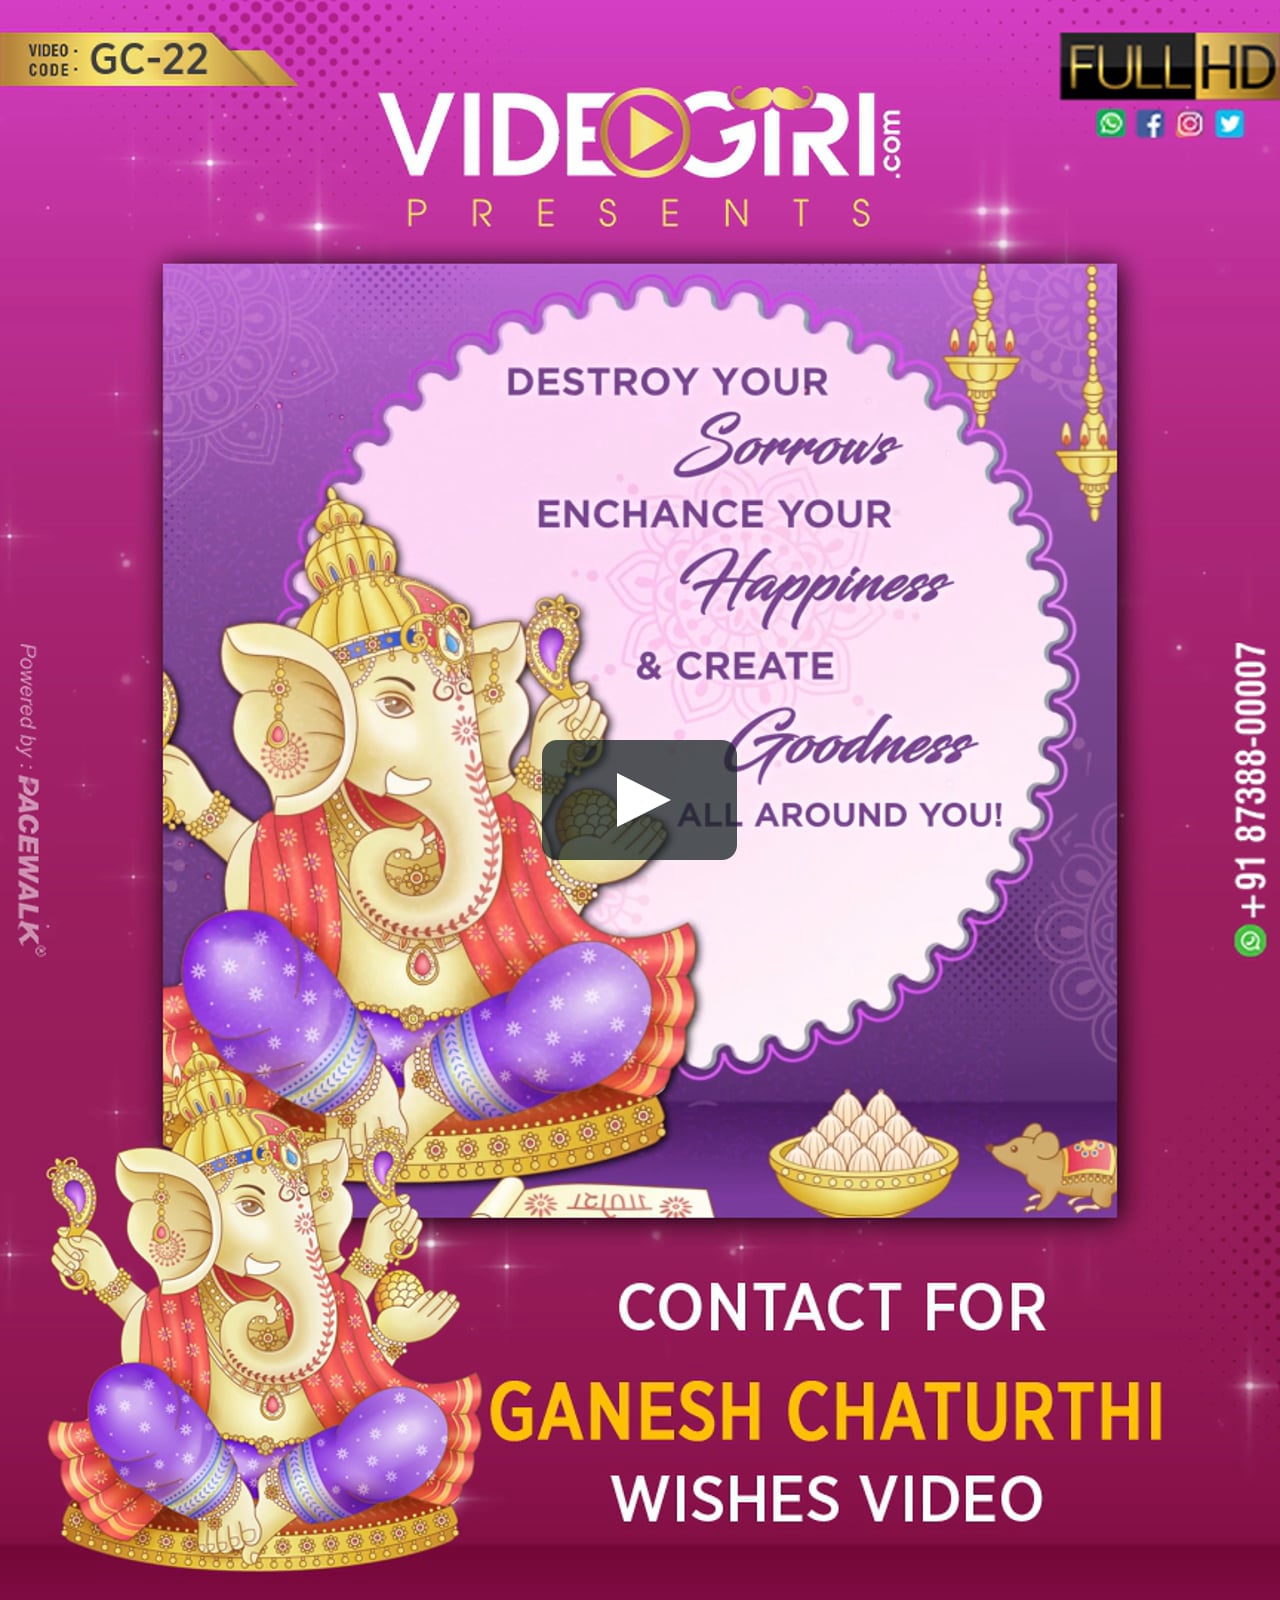 Happy Ganesh Chaturthi Greeting Video with Company Name on Vimeo